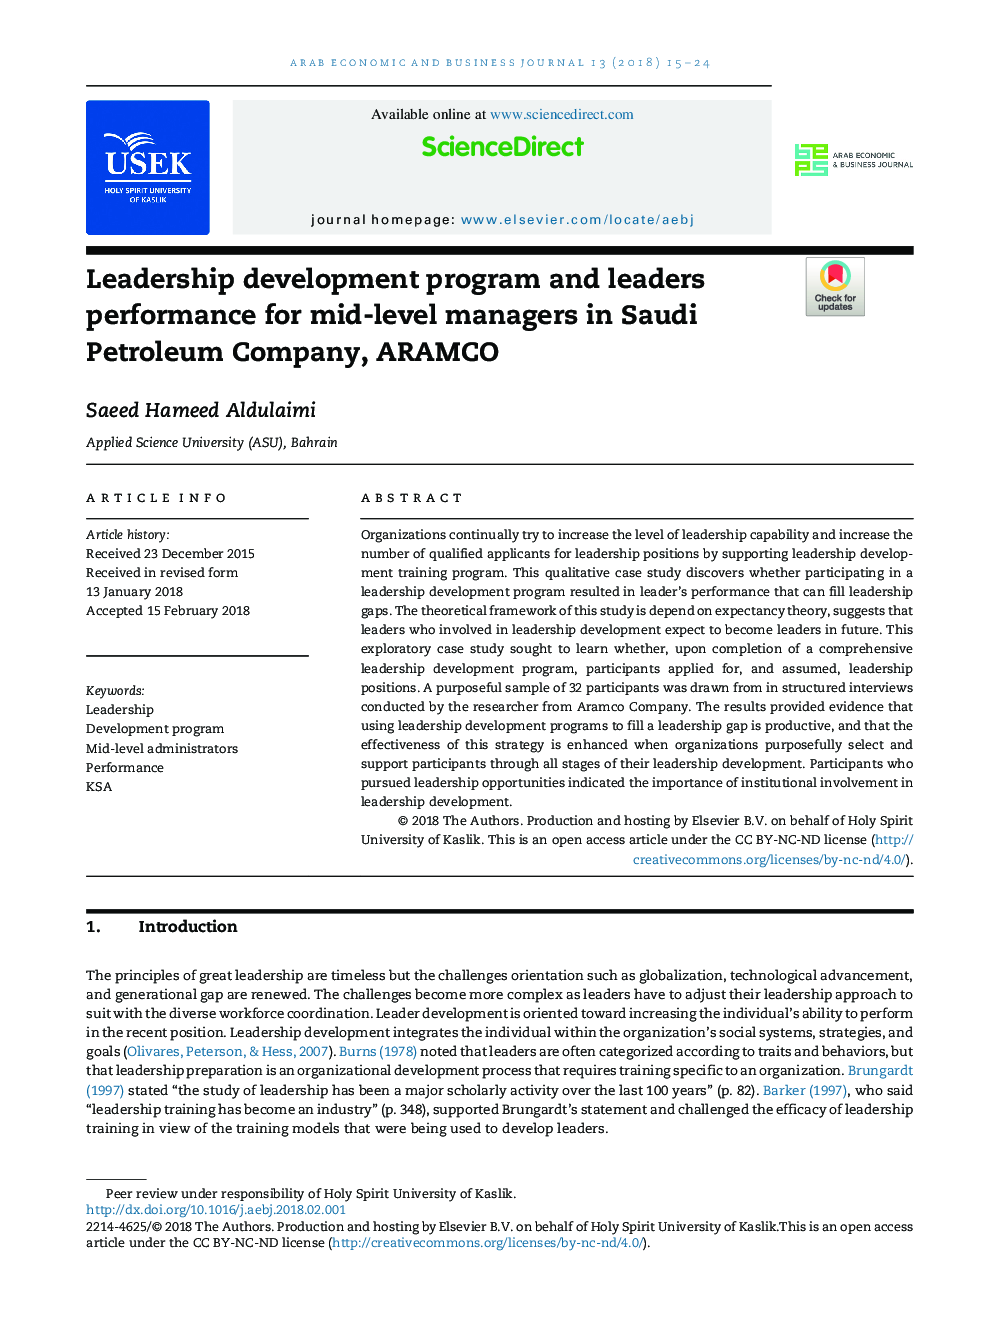 Leadership development program and leaders performance for mid-level managers in Saudi Petroleum Company, ARAMCO